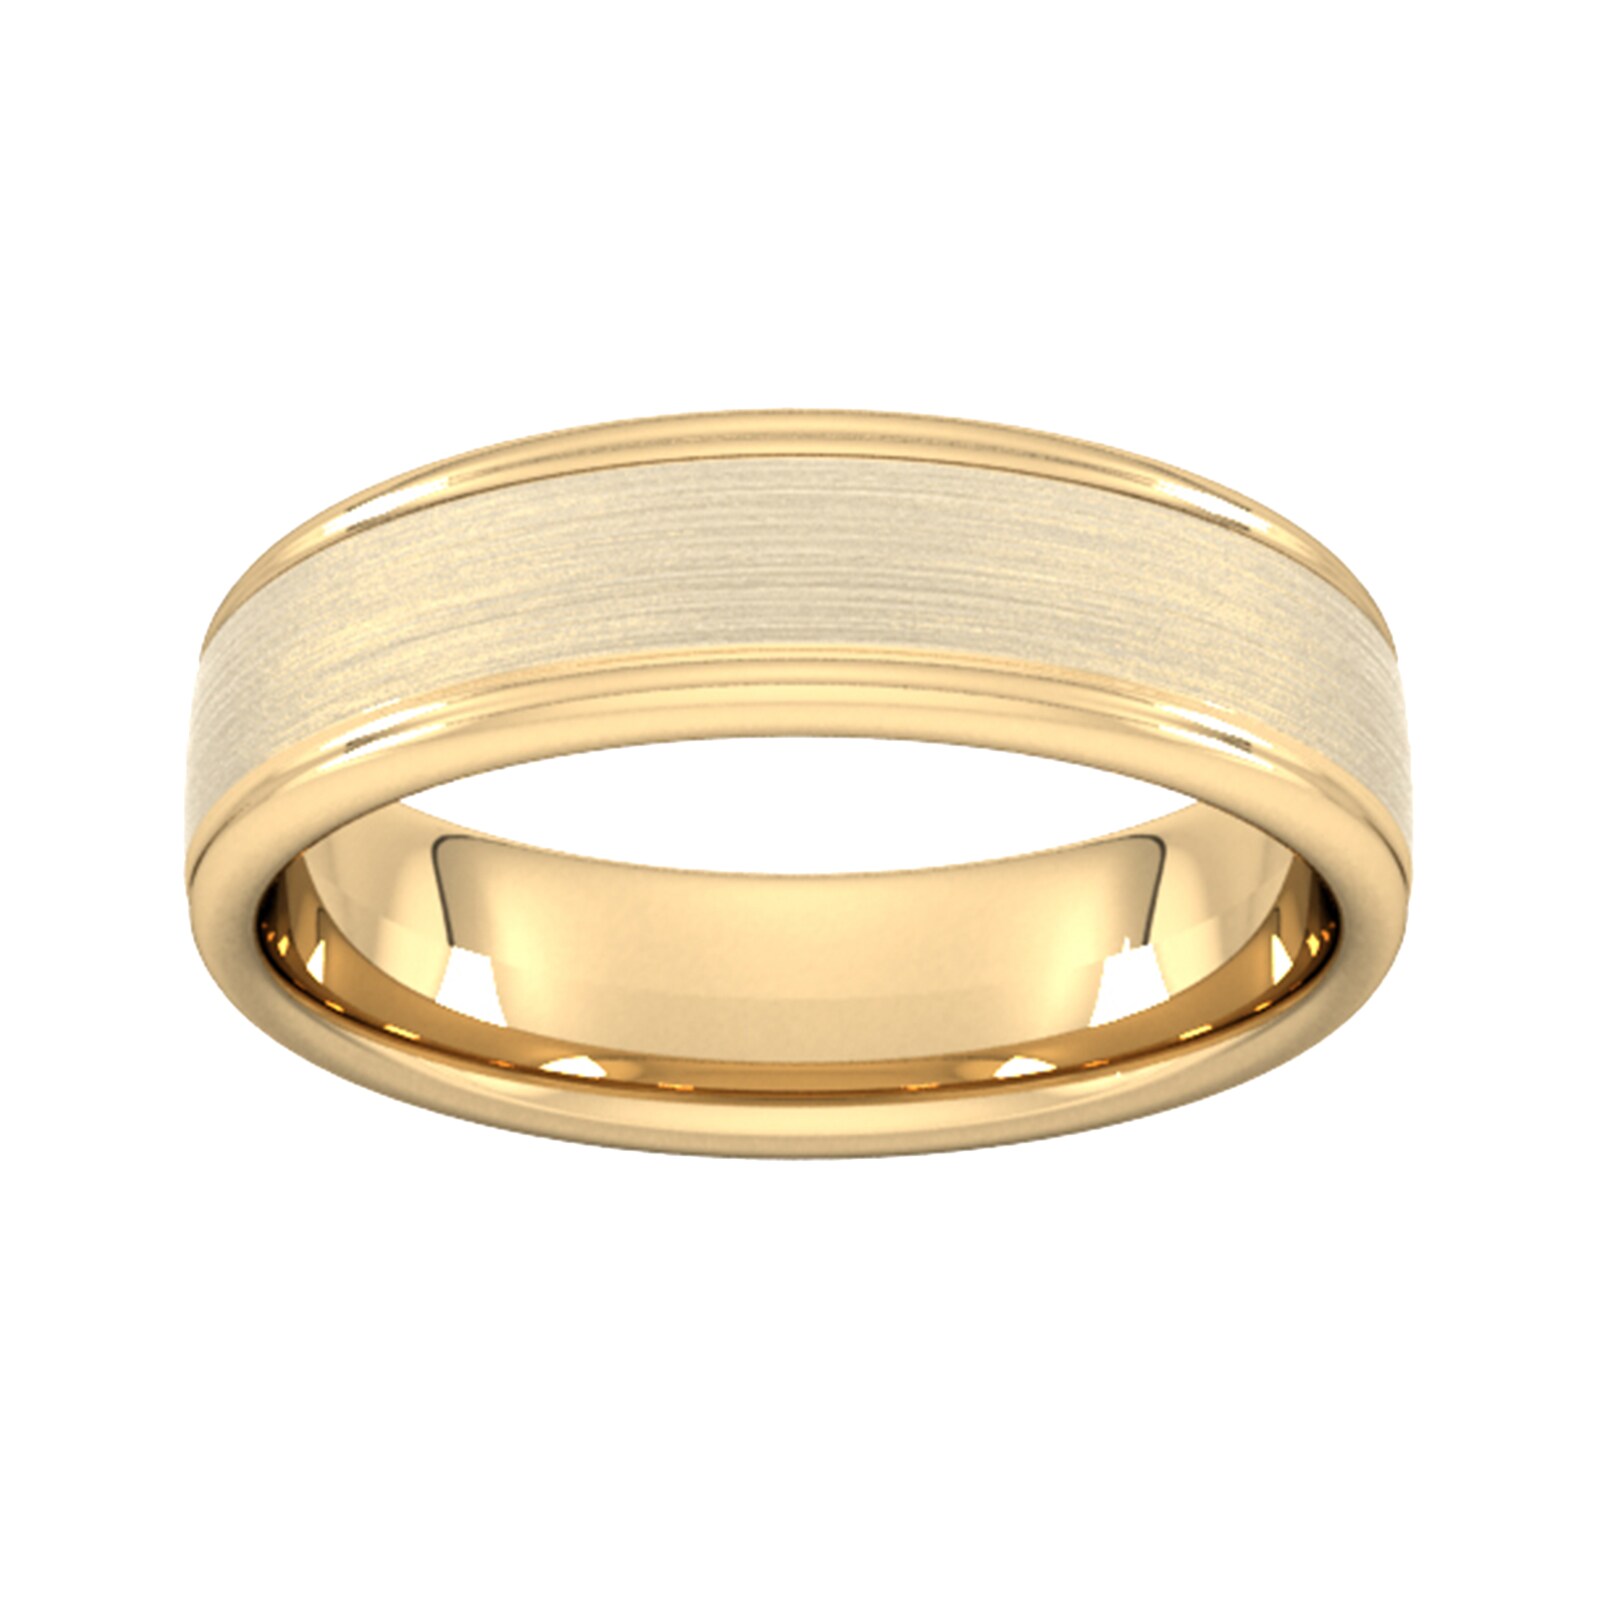 6mm D Shape Heavy Matt Centre With Grooves Wedding Ring In 9 Carat Yellow Gold - Ring Size T